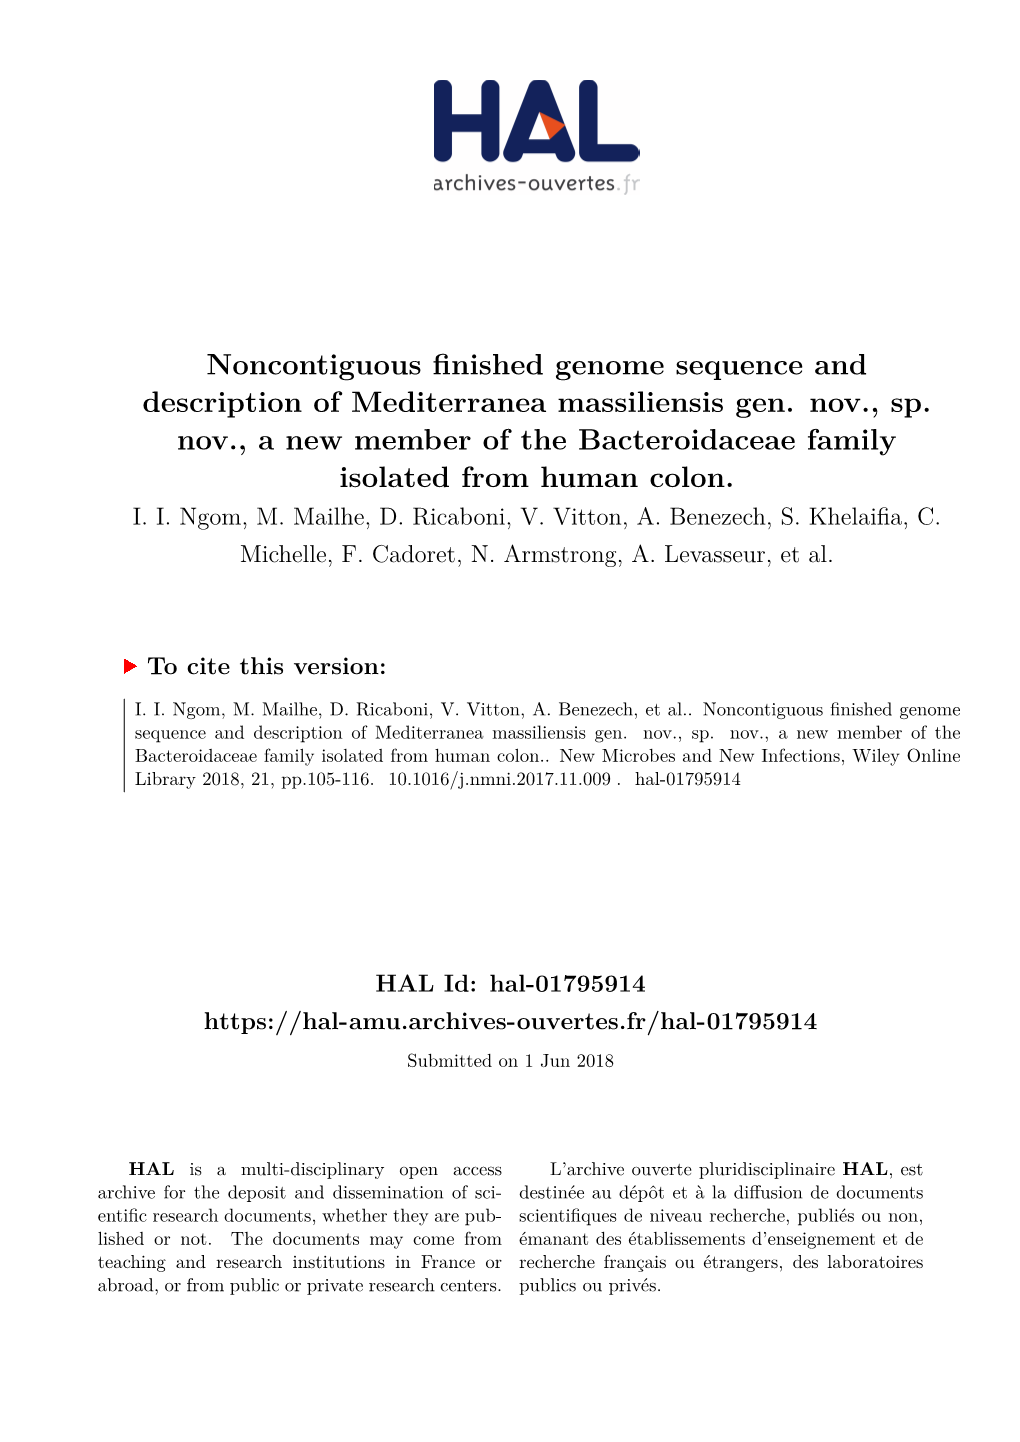 Noncontiguous Finished Genome Sequence and Description of Mediterranea Massiliensis Gen